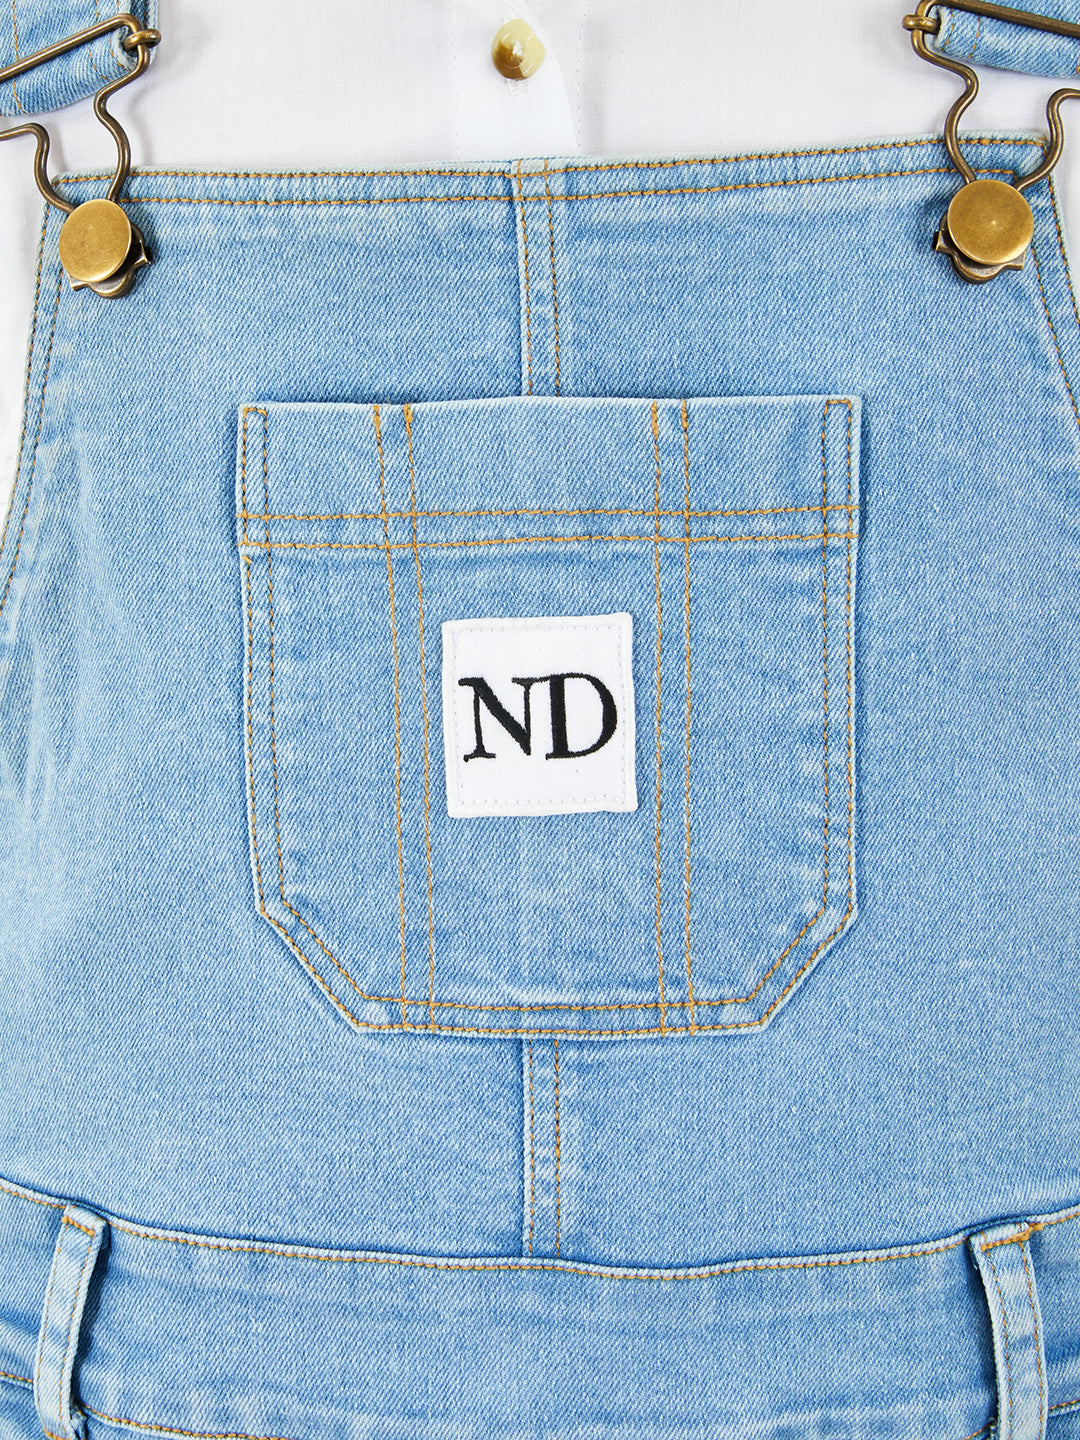 Naughty Dungaree® Full Length Ombre Bio Washed Cotton Denim Dungaree - Girls